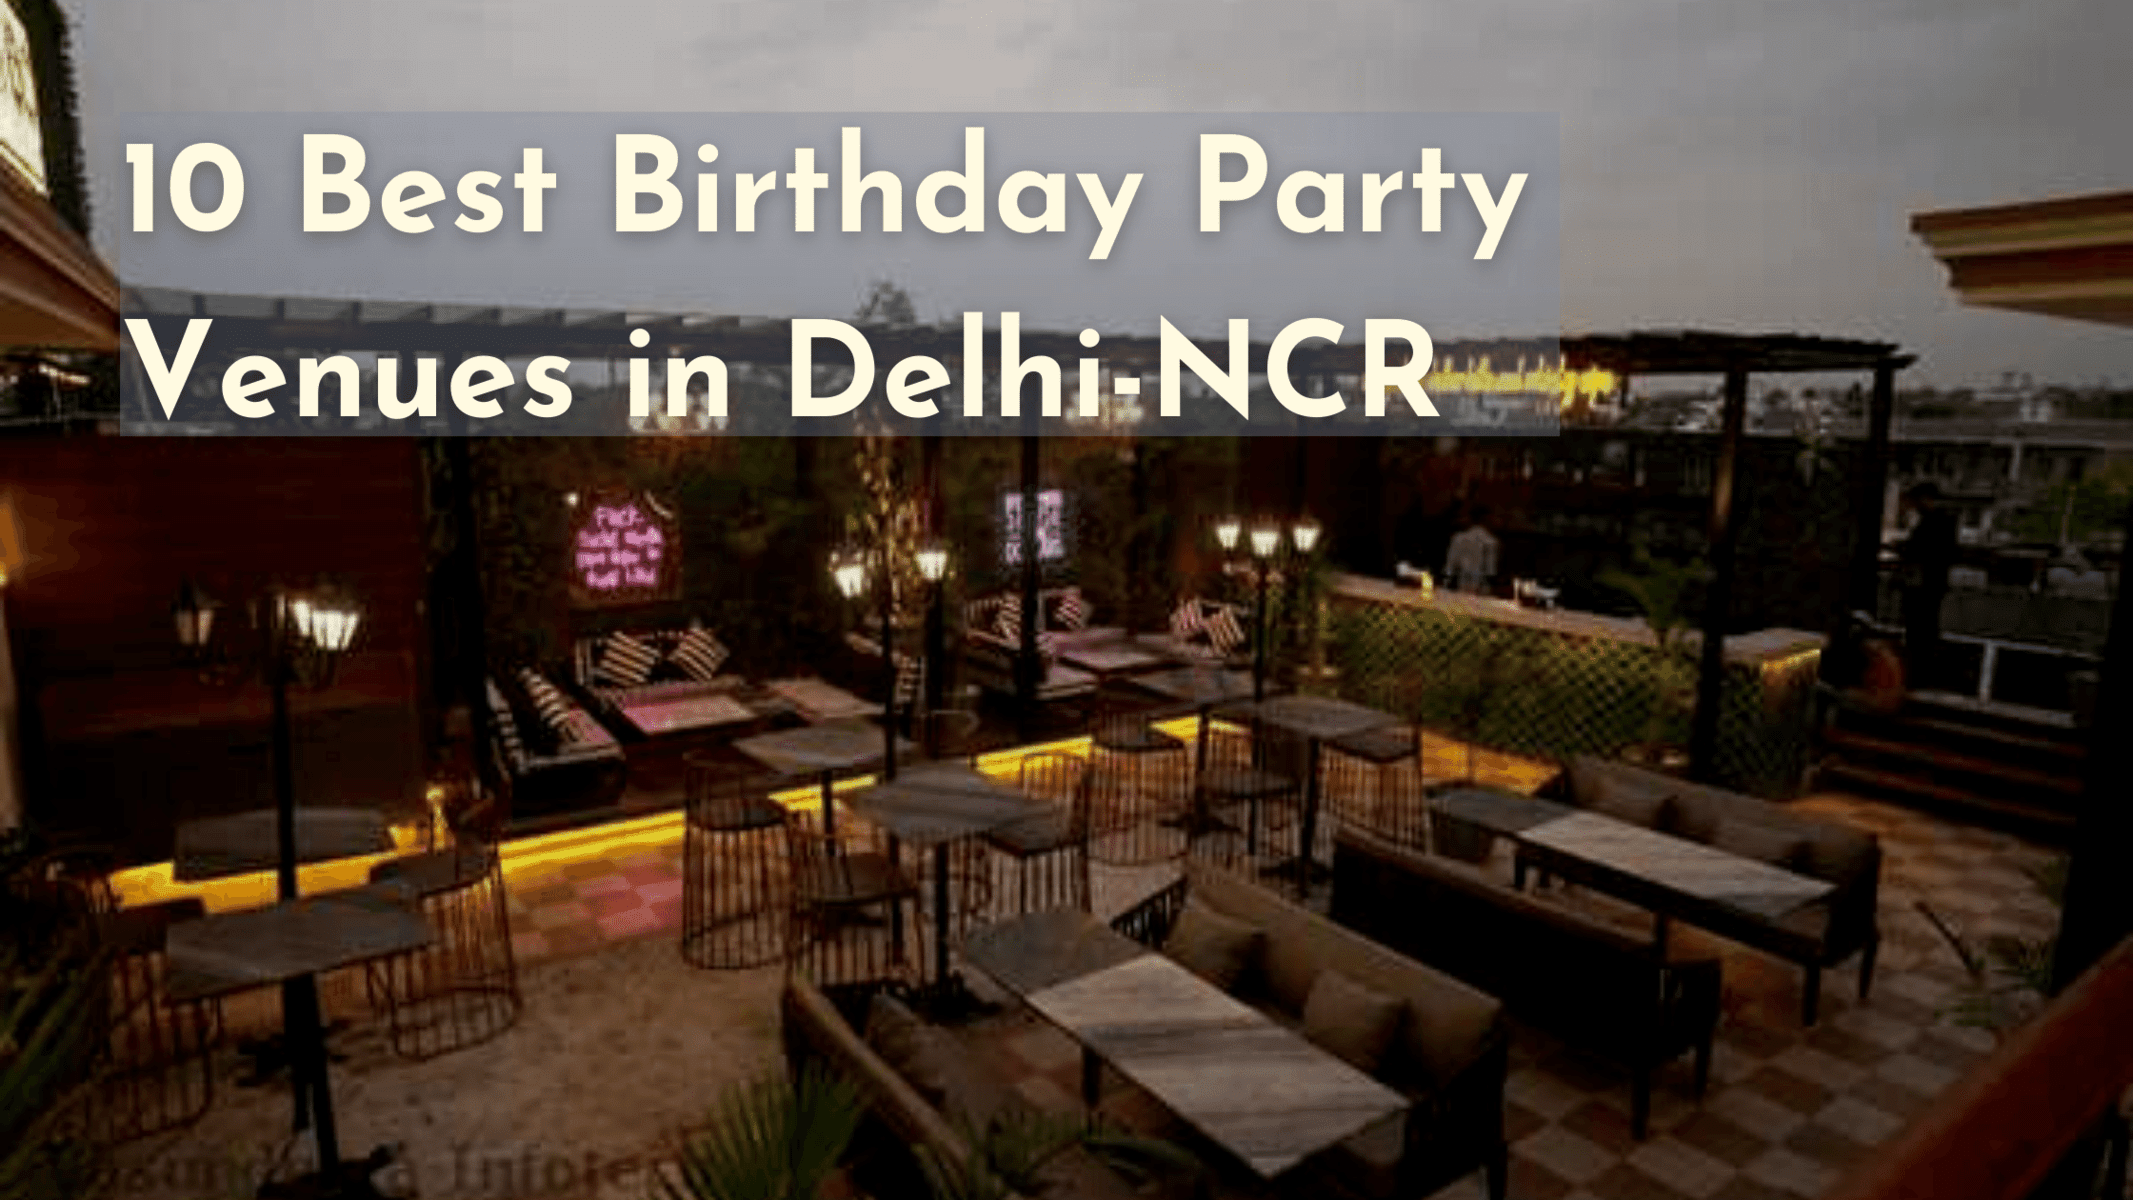 10 Best Venues to celebrate your Birthday in Delhi NCR